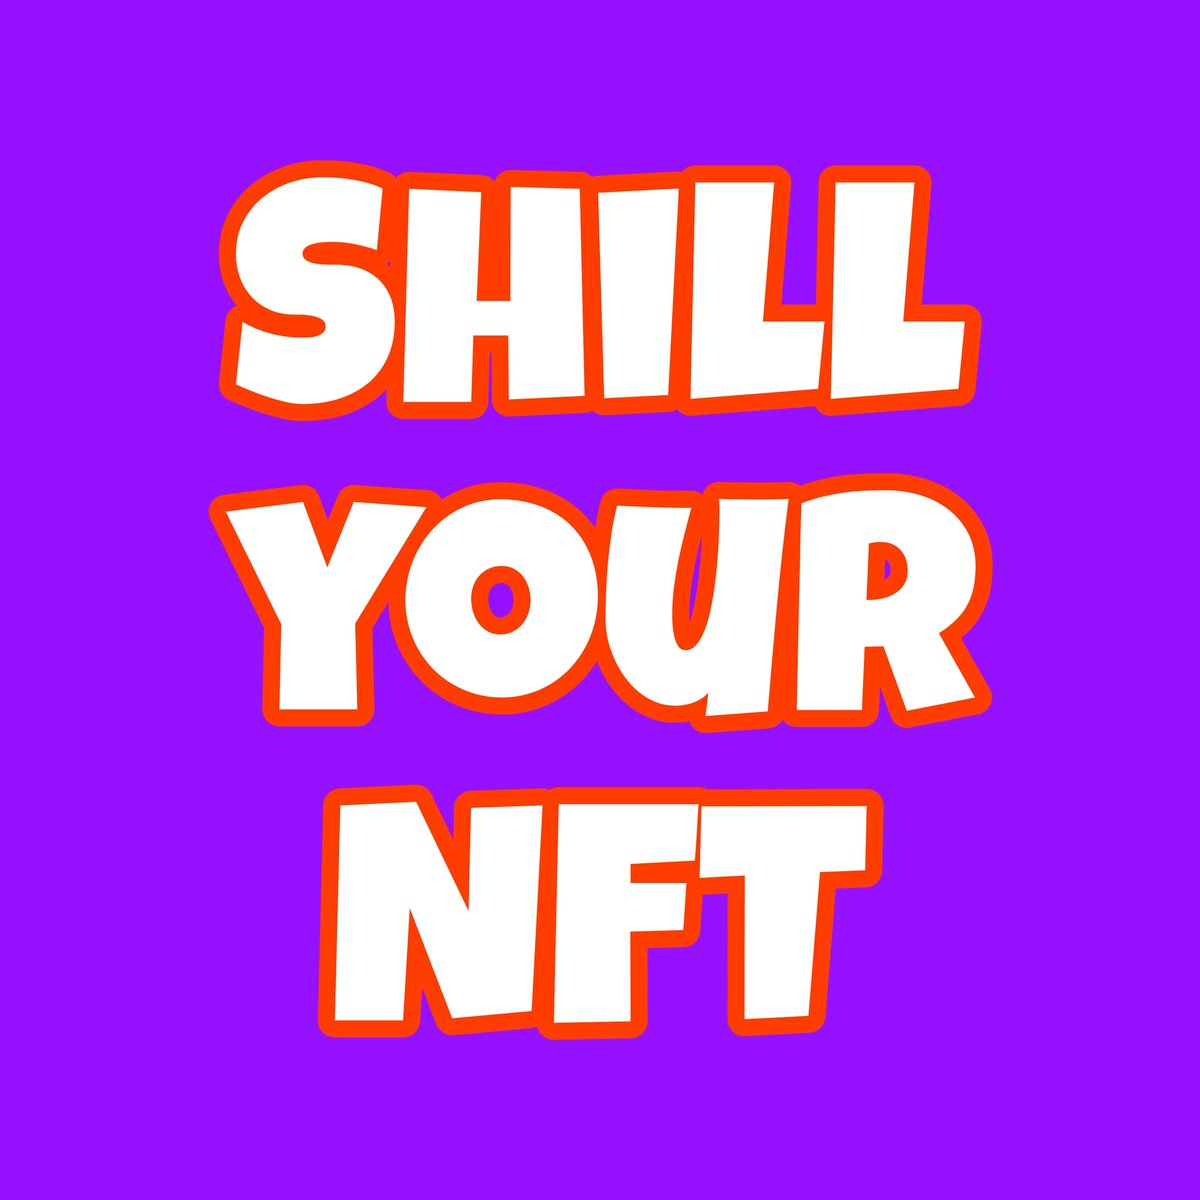 I AM BUYING #NFT My next tweet will be purchase tweet Rules 👇 ✅ DROP your nft ✅ join this discord and verify 👇 discord.gg/YcQfqV92c2 ✅ follow @DhanushNFT ✅ tag 3 friends #NFTCommunity #NFTartists